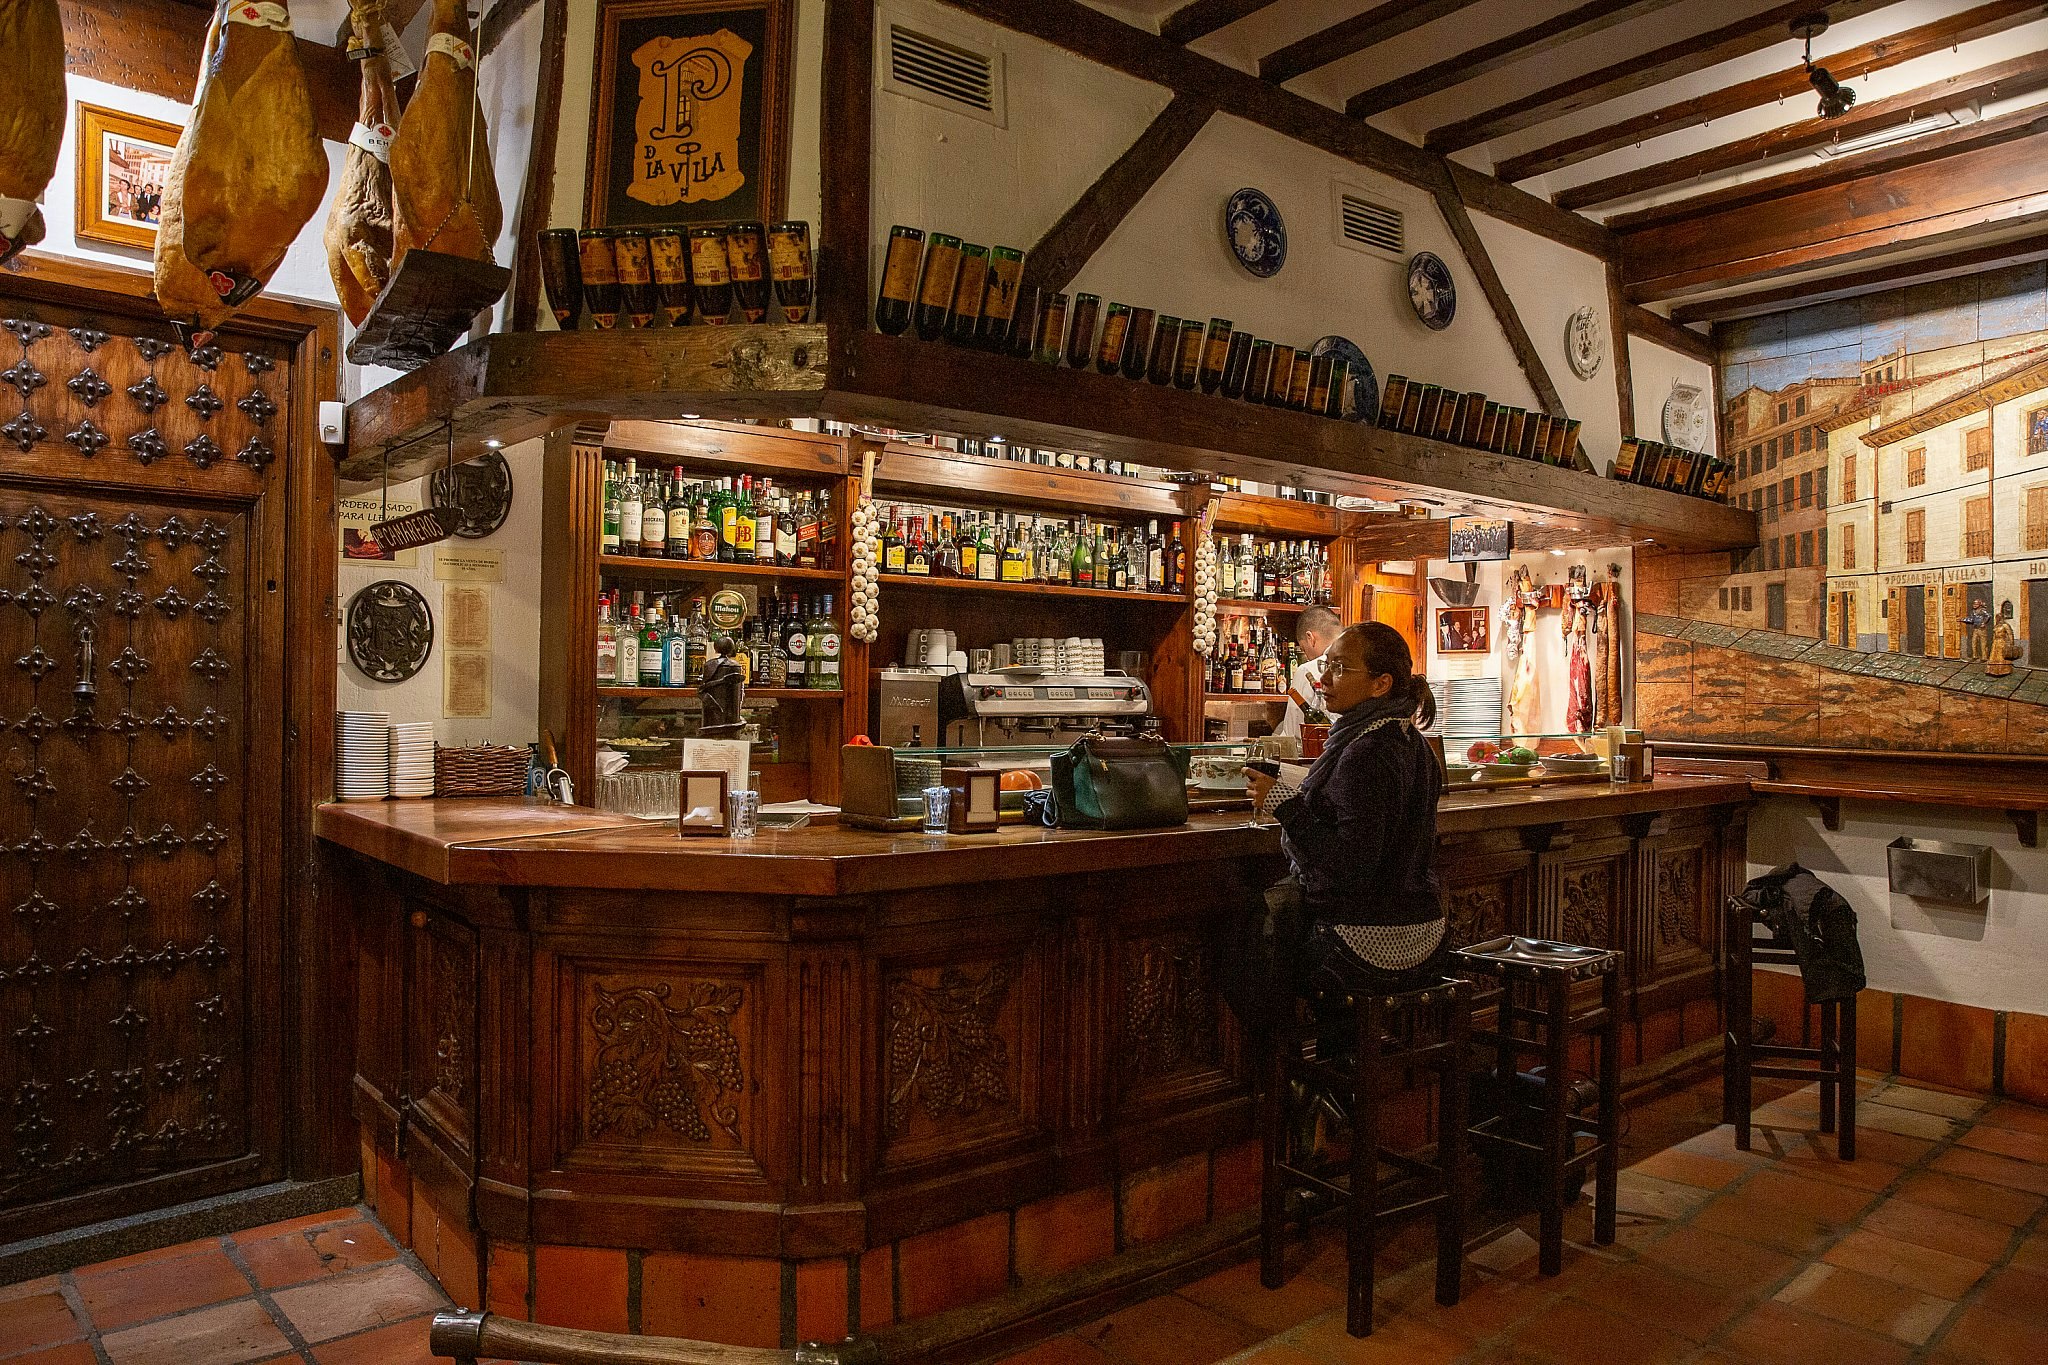 Posada de la Villa in Madrid: a lady sits at an intricately carved wooden bar; there is a mural on the far wall, and a beamed ceiling from which cuts of meat are hanging.